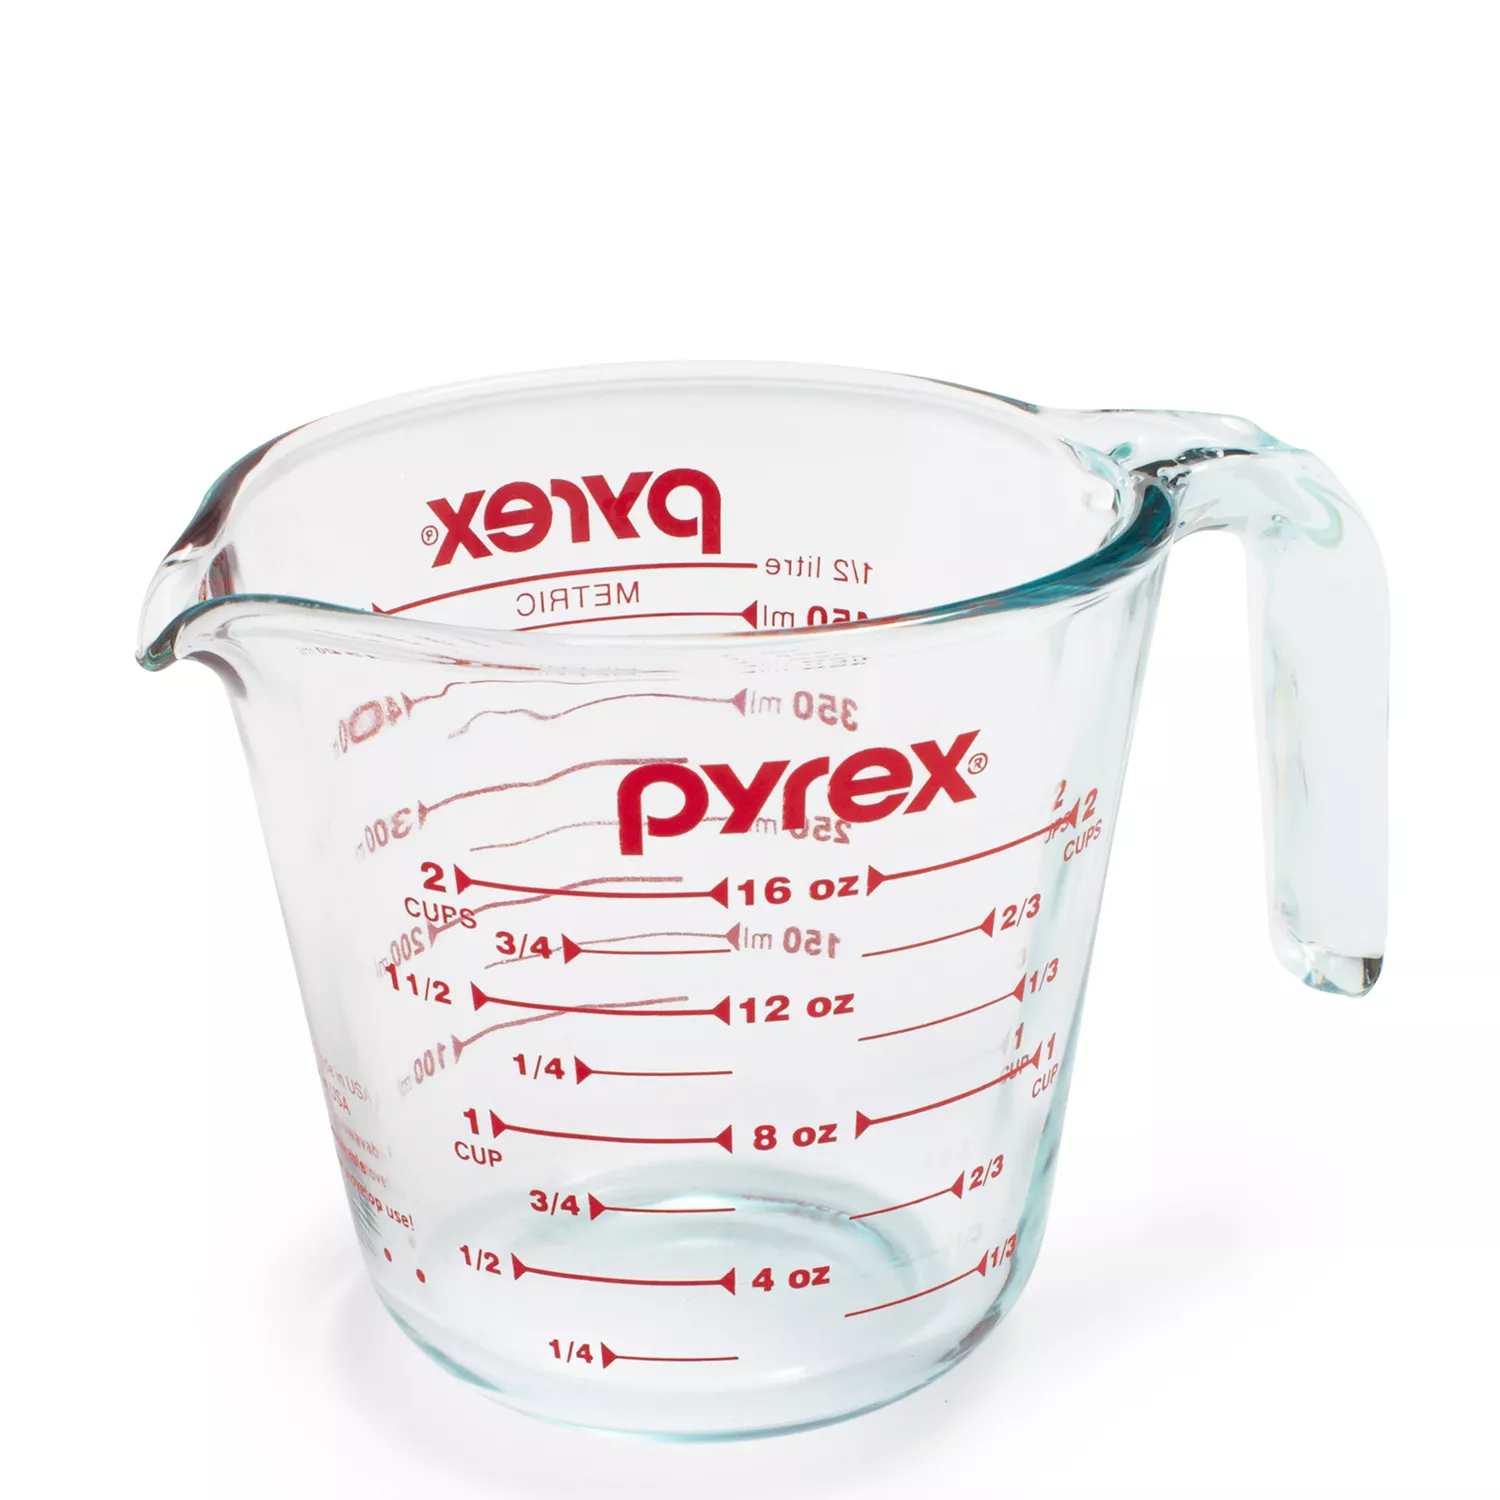 Pyrex Glass Measuring Cups for Sale in Suprstitn Mountain, AZ